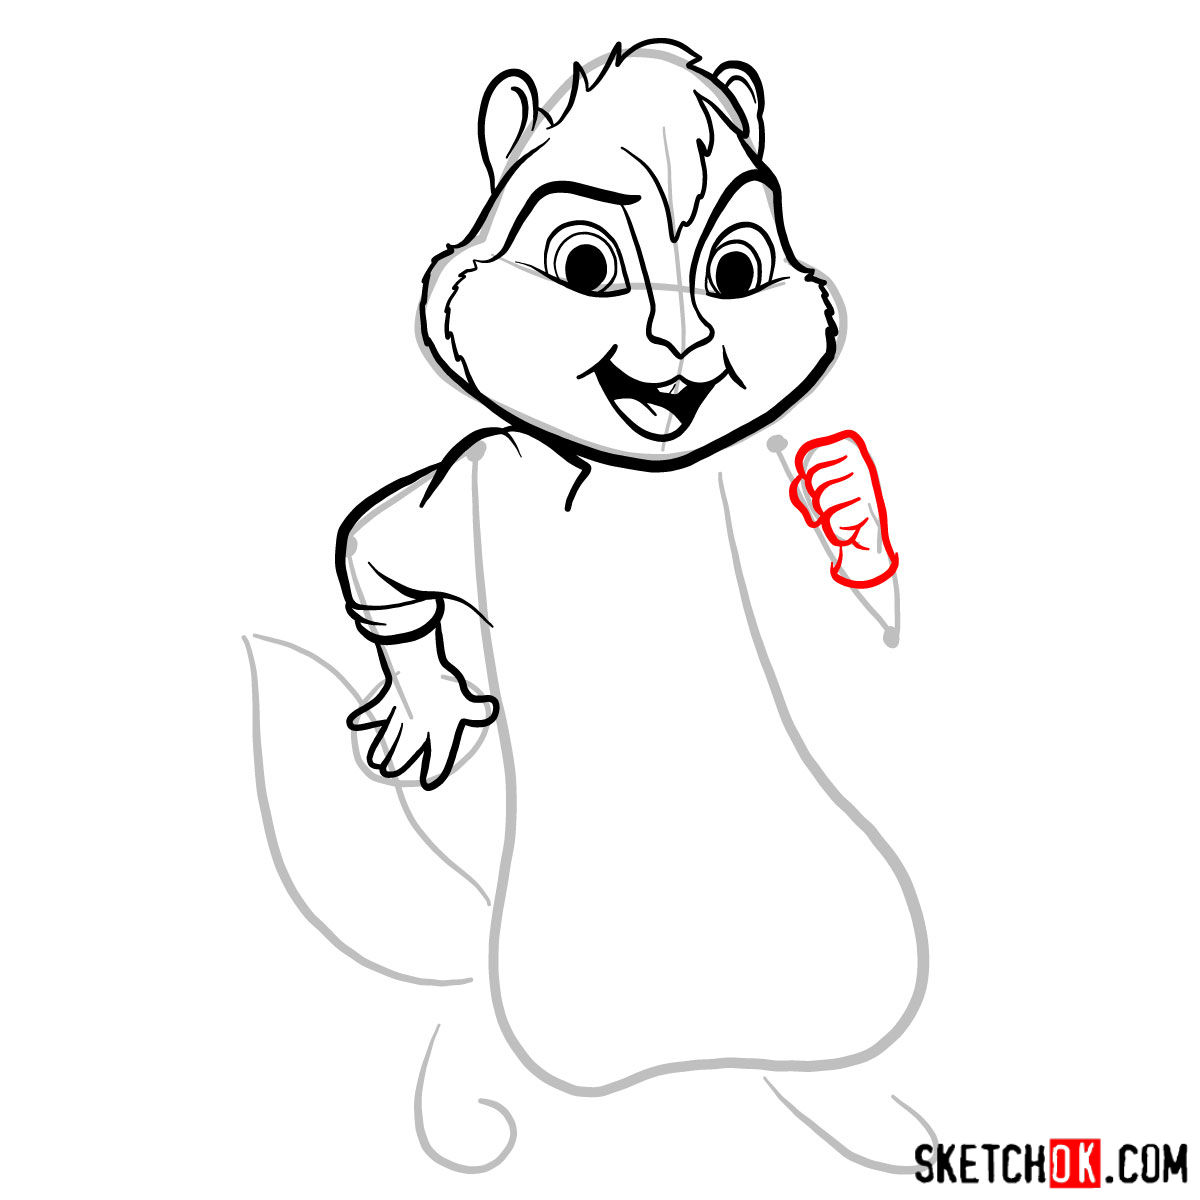 How to draw Alvin from Alvin and the Chipmunks - step 07